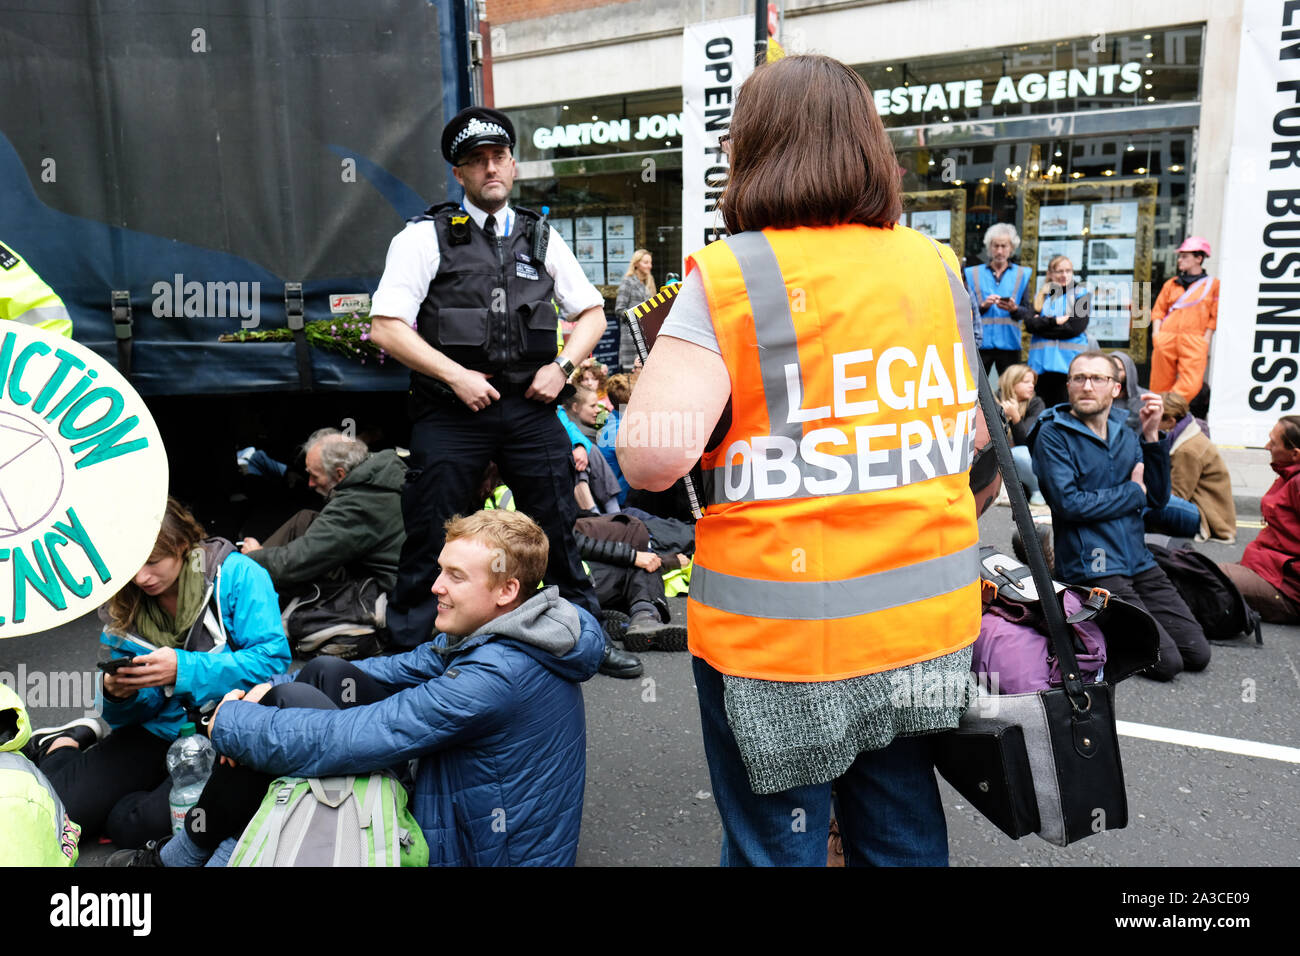 Westminster, London, UK - Monday 7th October 2019 - Extinction Rebellion XR climate protesters block Marsham Street directly outside the Home Office - the protesters parked a lorry across the road and several have then glued themselves to the vehicle - Police and a Legal Observer watch on. Photo Steven May / Alamy Live News Stock Photo